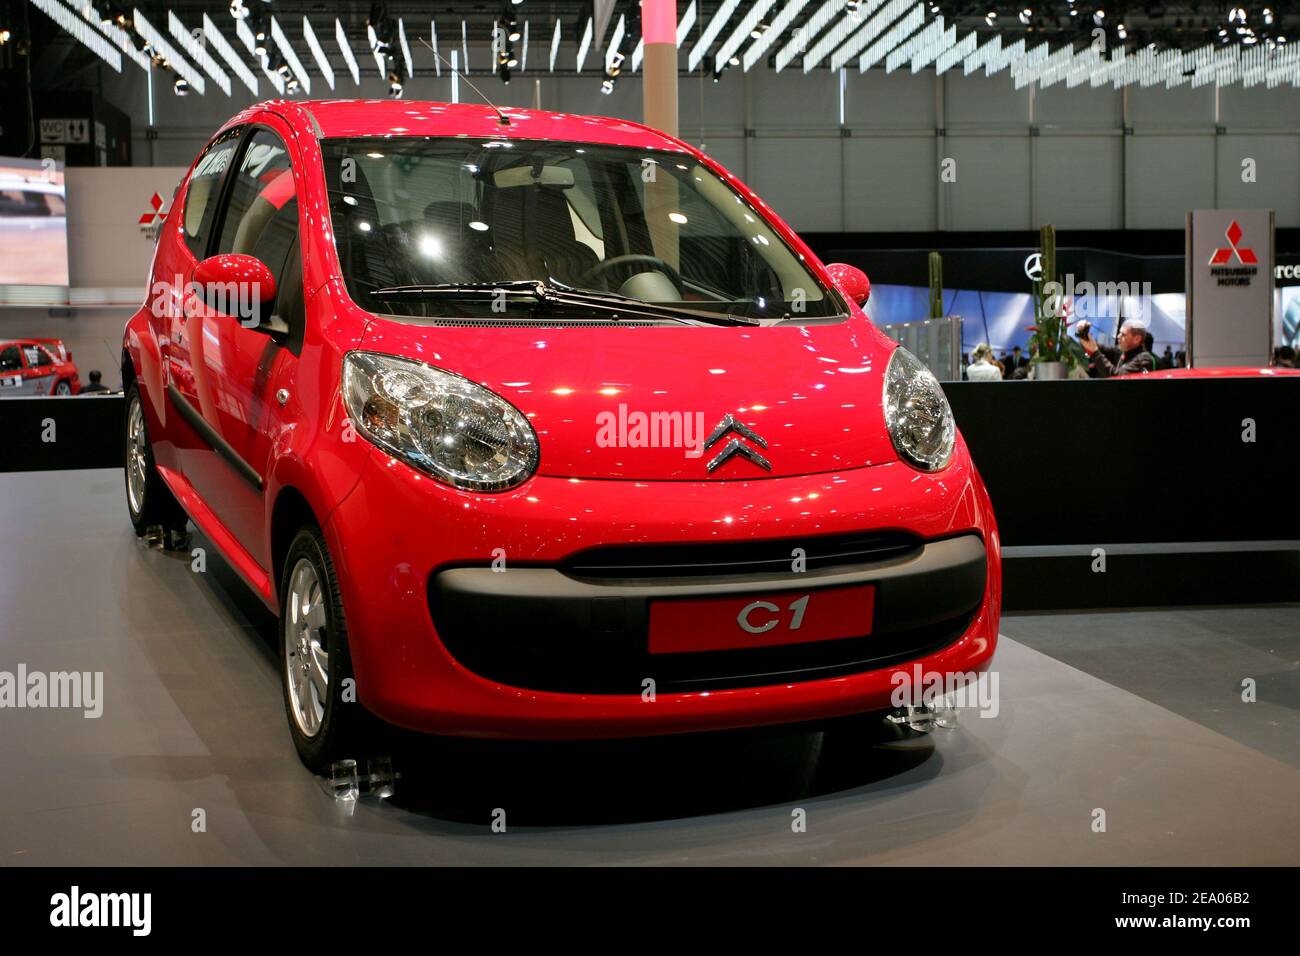 The new Citroen C1 is on display during its first world presentation at the 75th Geneva motor show in Geneva, Switzerland, on March 2, 2005. In a bid to cut costs Japan's Toyota and France's PSA Peugeot Citroen, who normally compete head on, have turned to partnership to produce three small cars, the Aygo from Toyota, the Citroen C1 and the Peugeot 107, at a jointly-owned plant in the Czech Republic. Photo by Laurent Zabulon/ABACA. Stock Photo